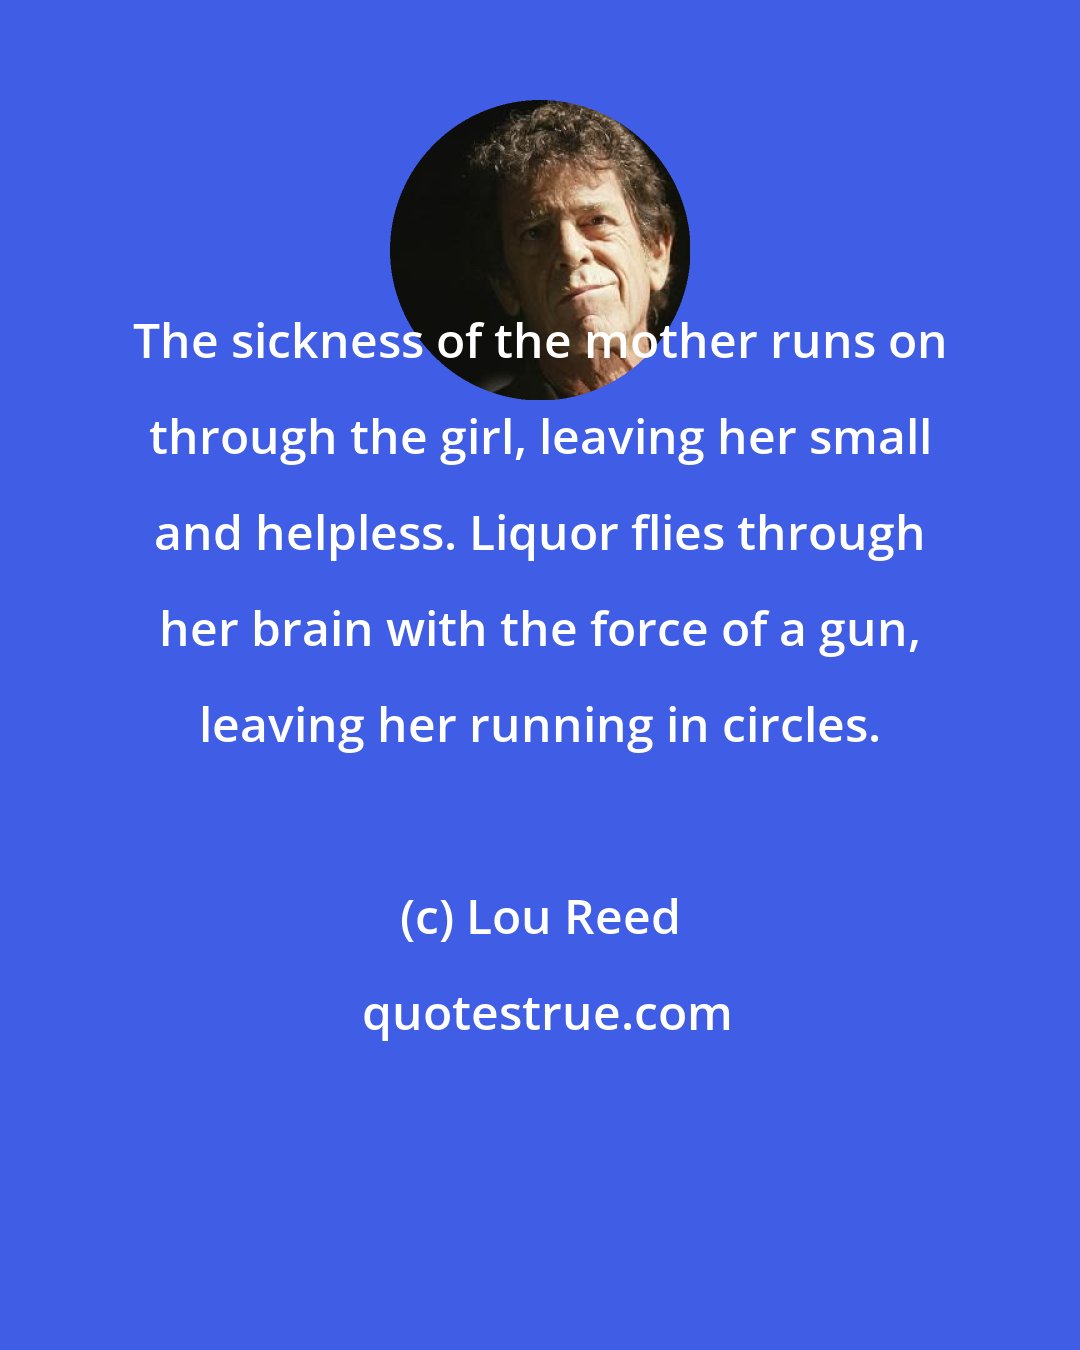 Lou Reed: The sickness of the mother runs on through the girl, leaving her small and helpless. Liquor flies through her brain with the force of a gun, leaving her running in circles.